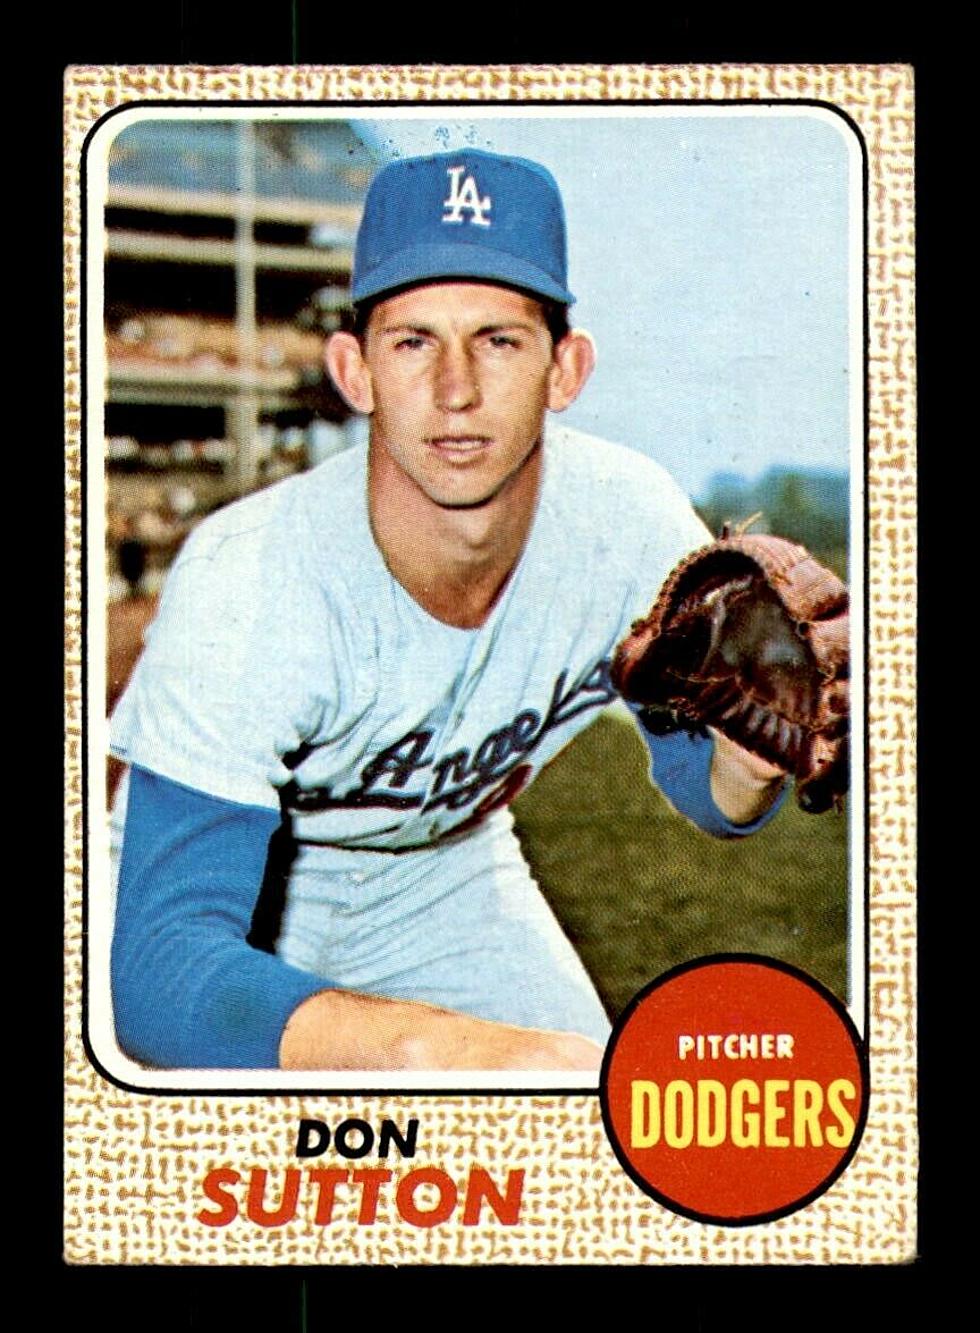 Hall of Fame Announces Death of Don Sutton at 75